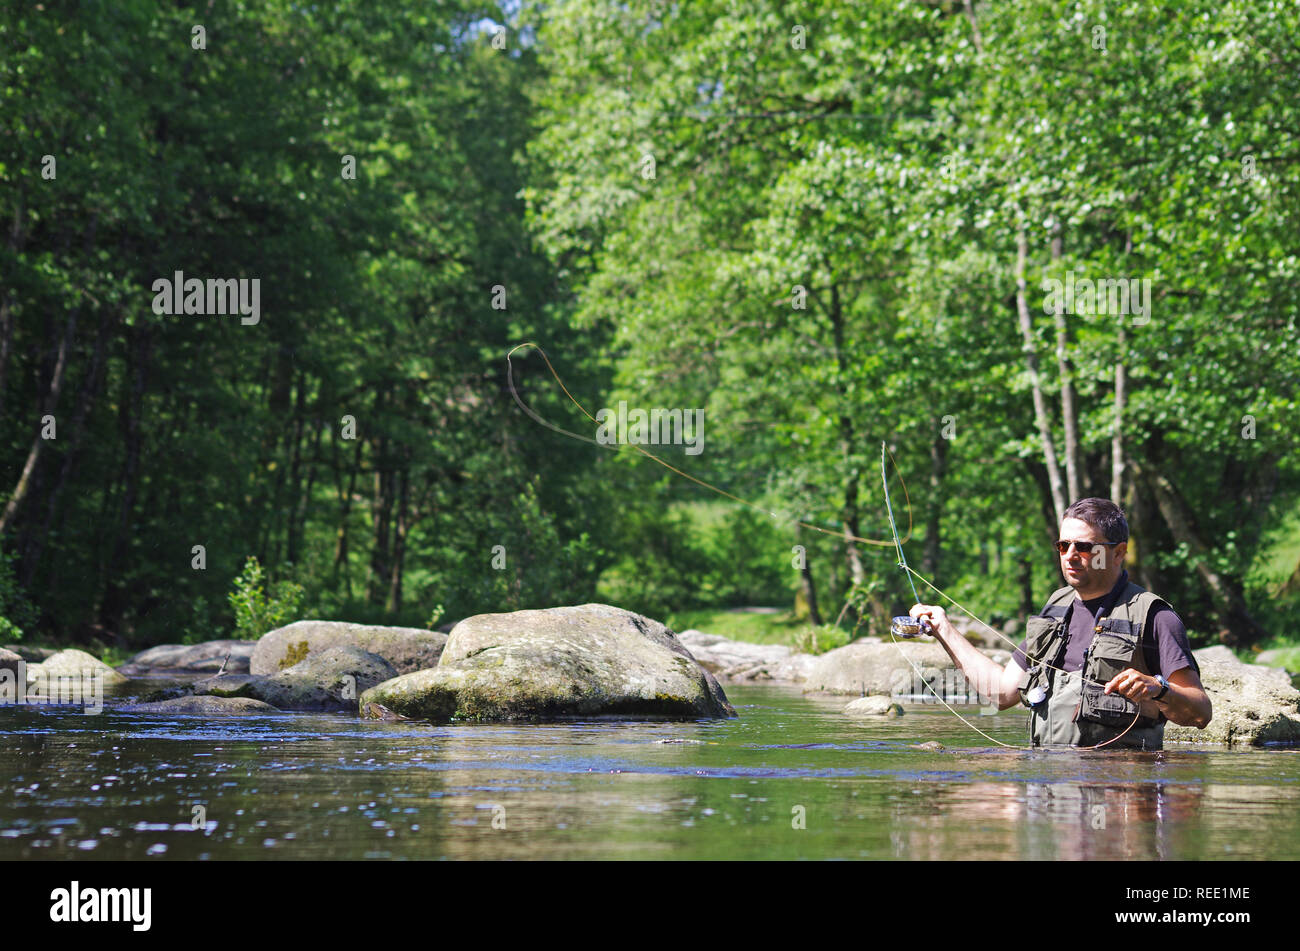 Fly fishermen in action. Catch of fish, fly fishing scene, freshwater fishing, trout fishing Stock Photo